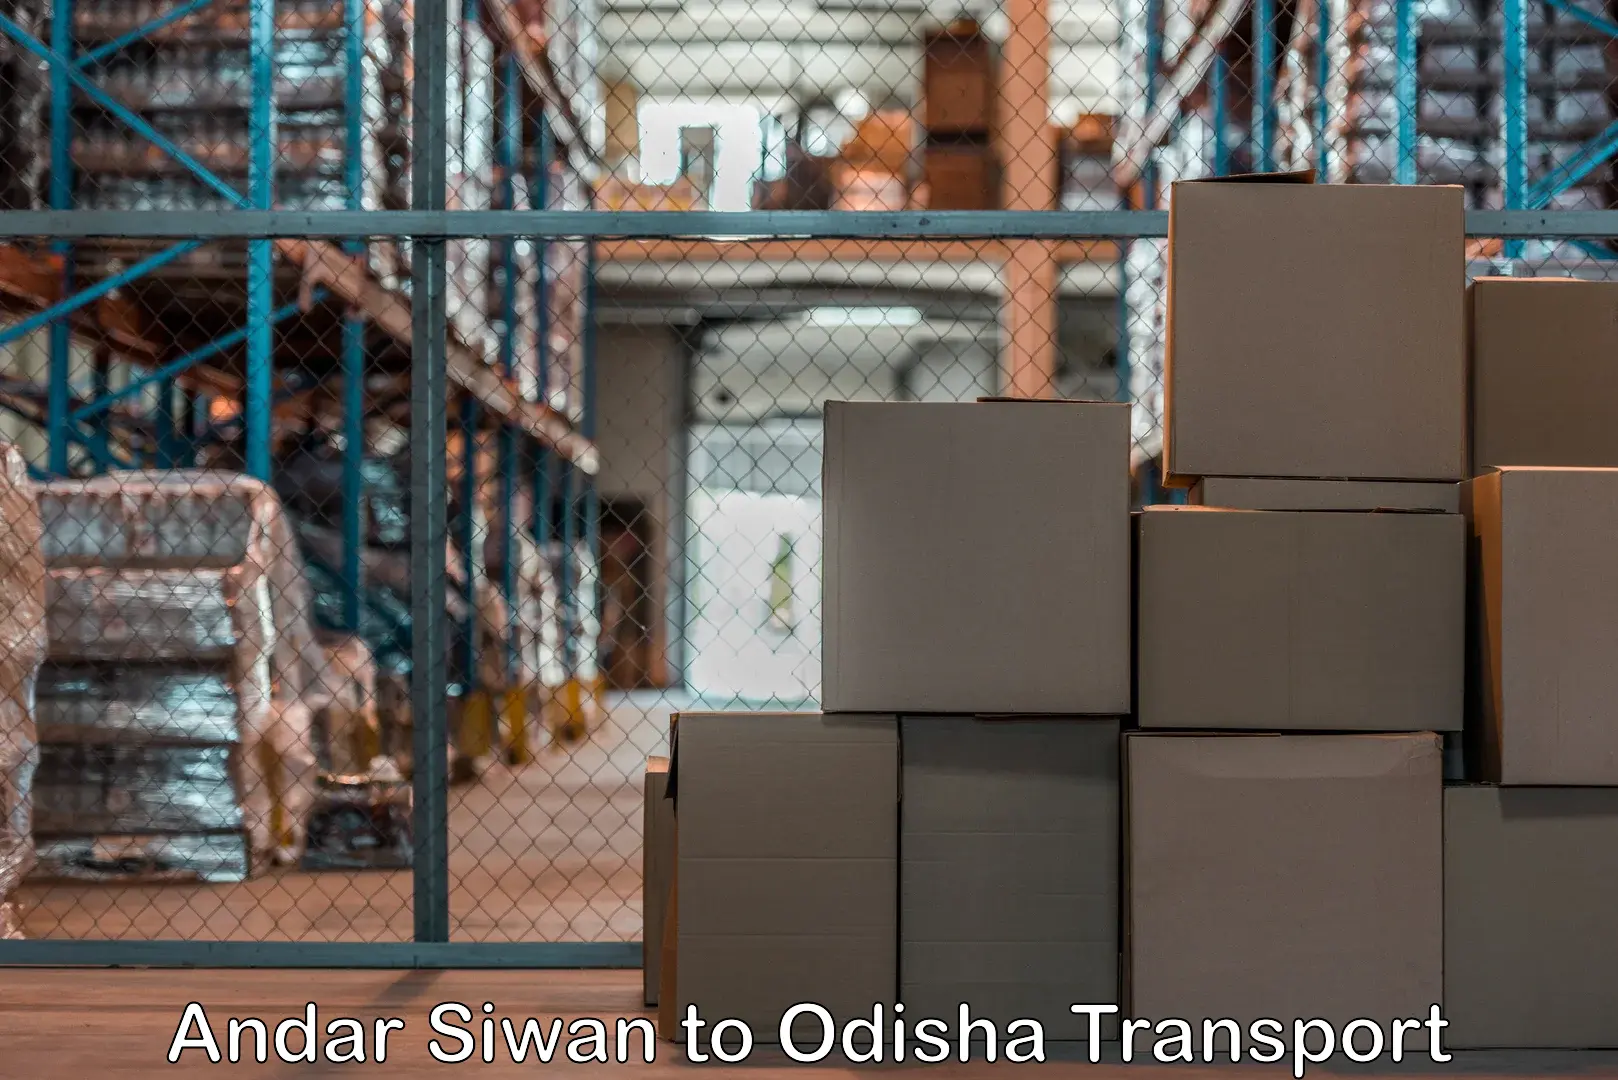 Road transport services in Andar Siwan to Keonjhar